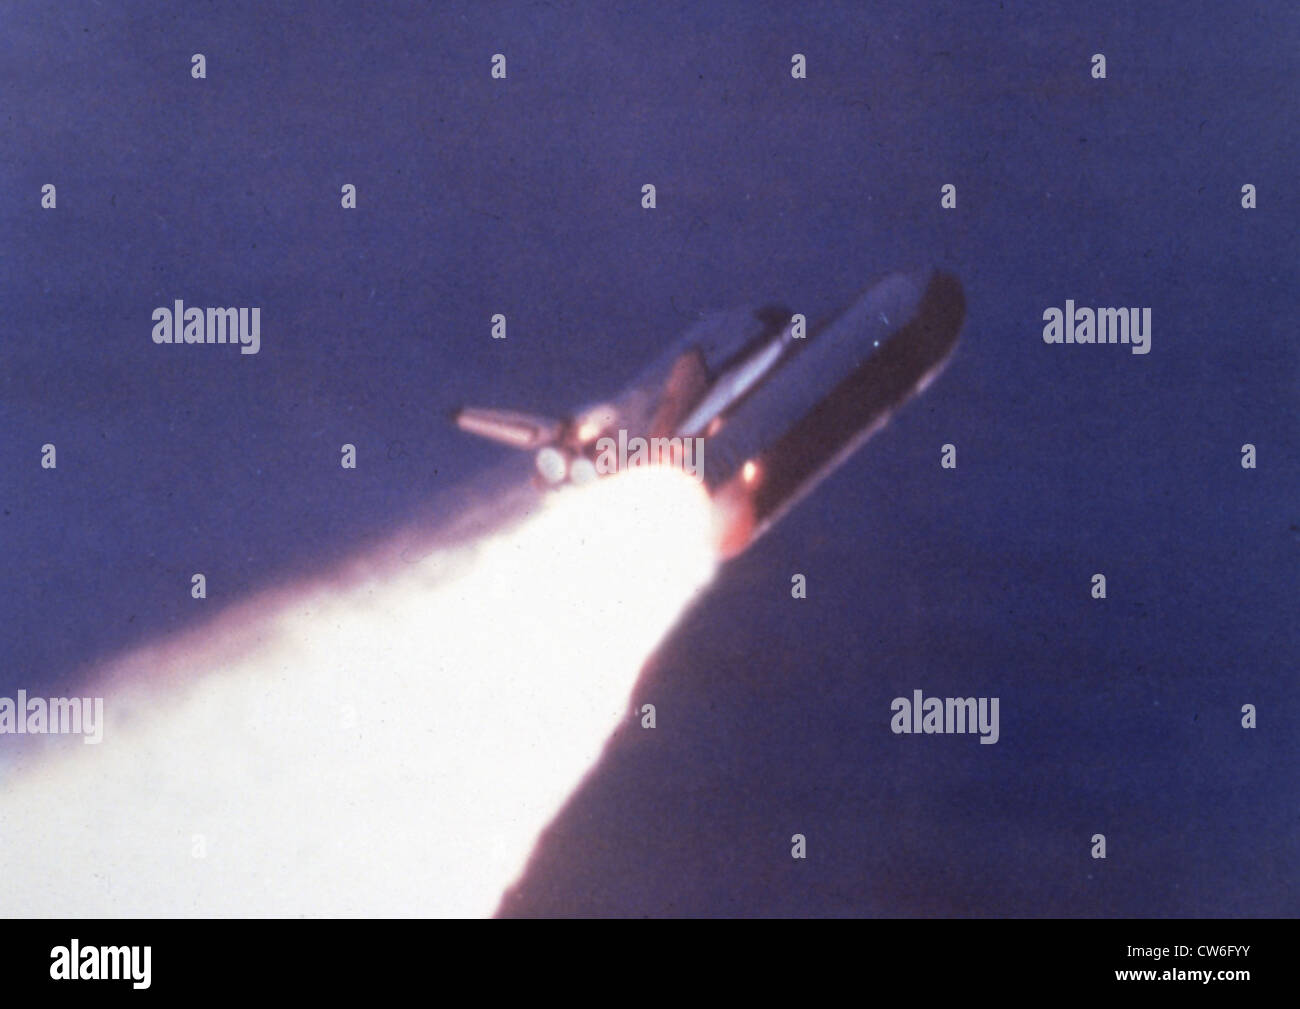 Explosion of space shuttle Challenger (January 28, 1986) Stock Photo